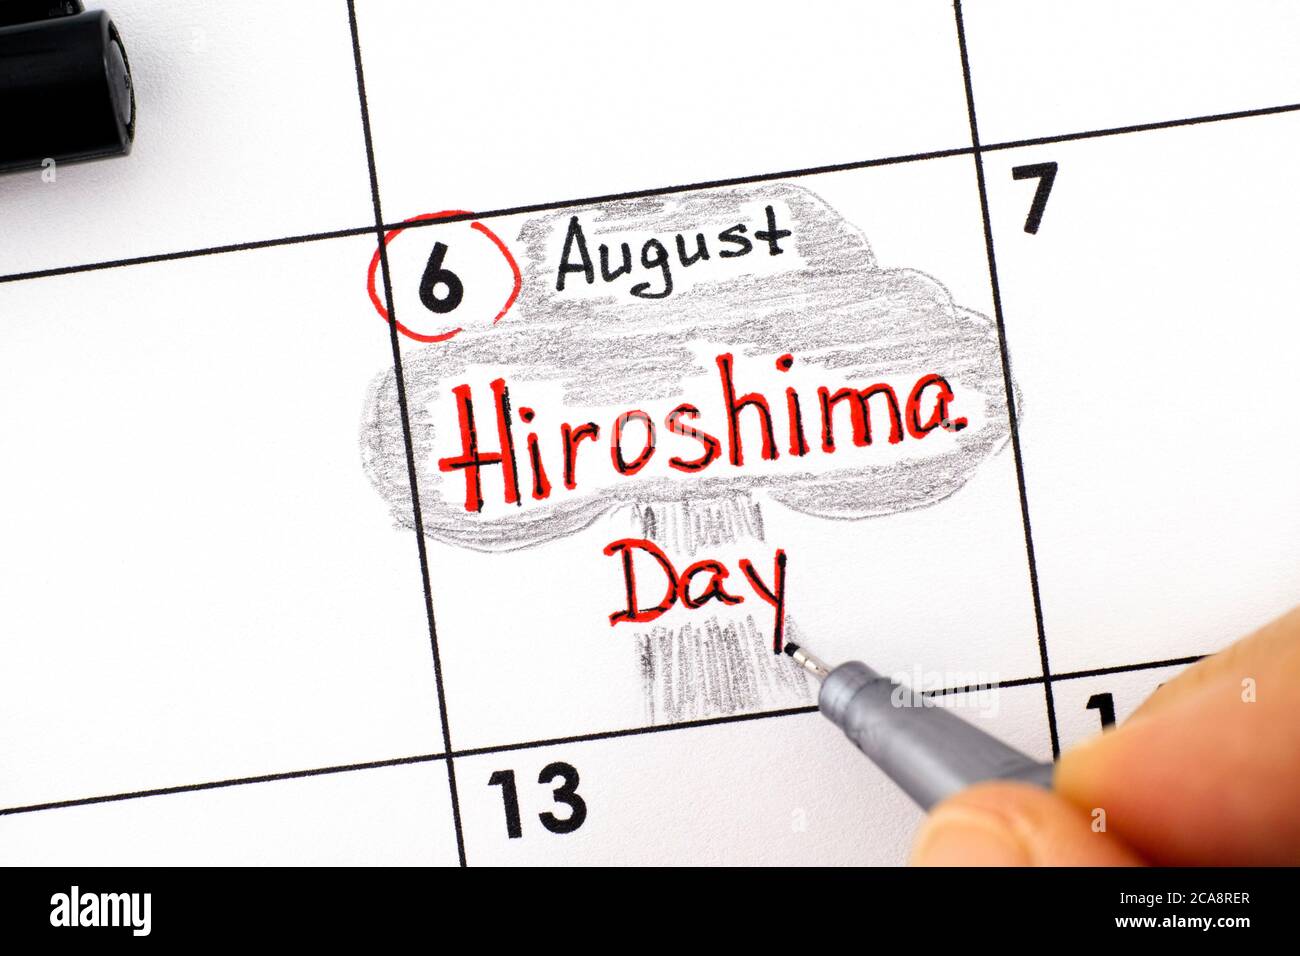 Hiroshima day 6 august file Royalty Free Vector Image